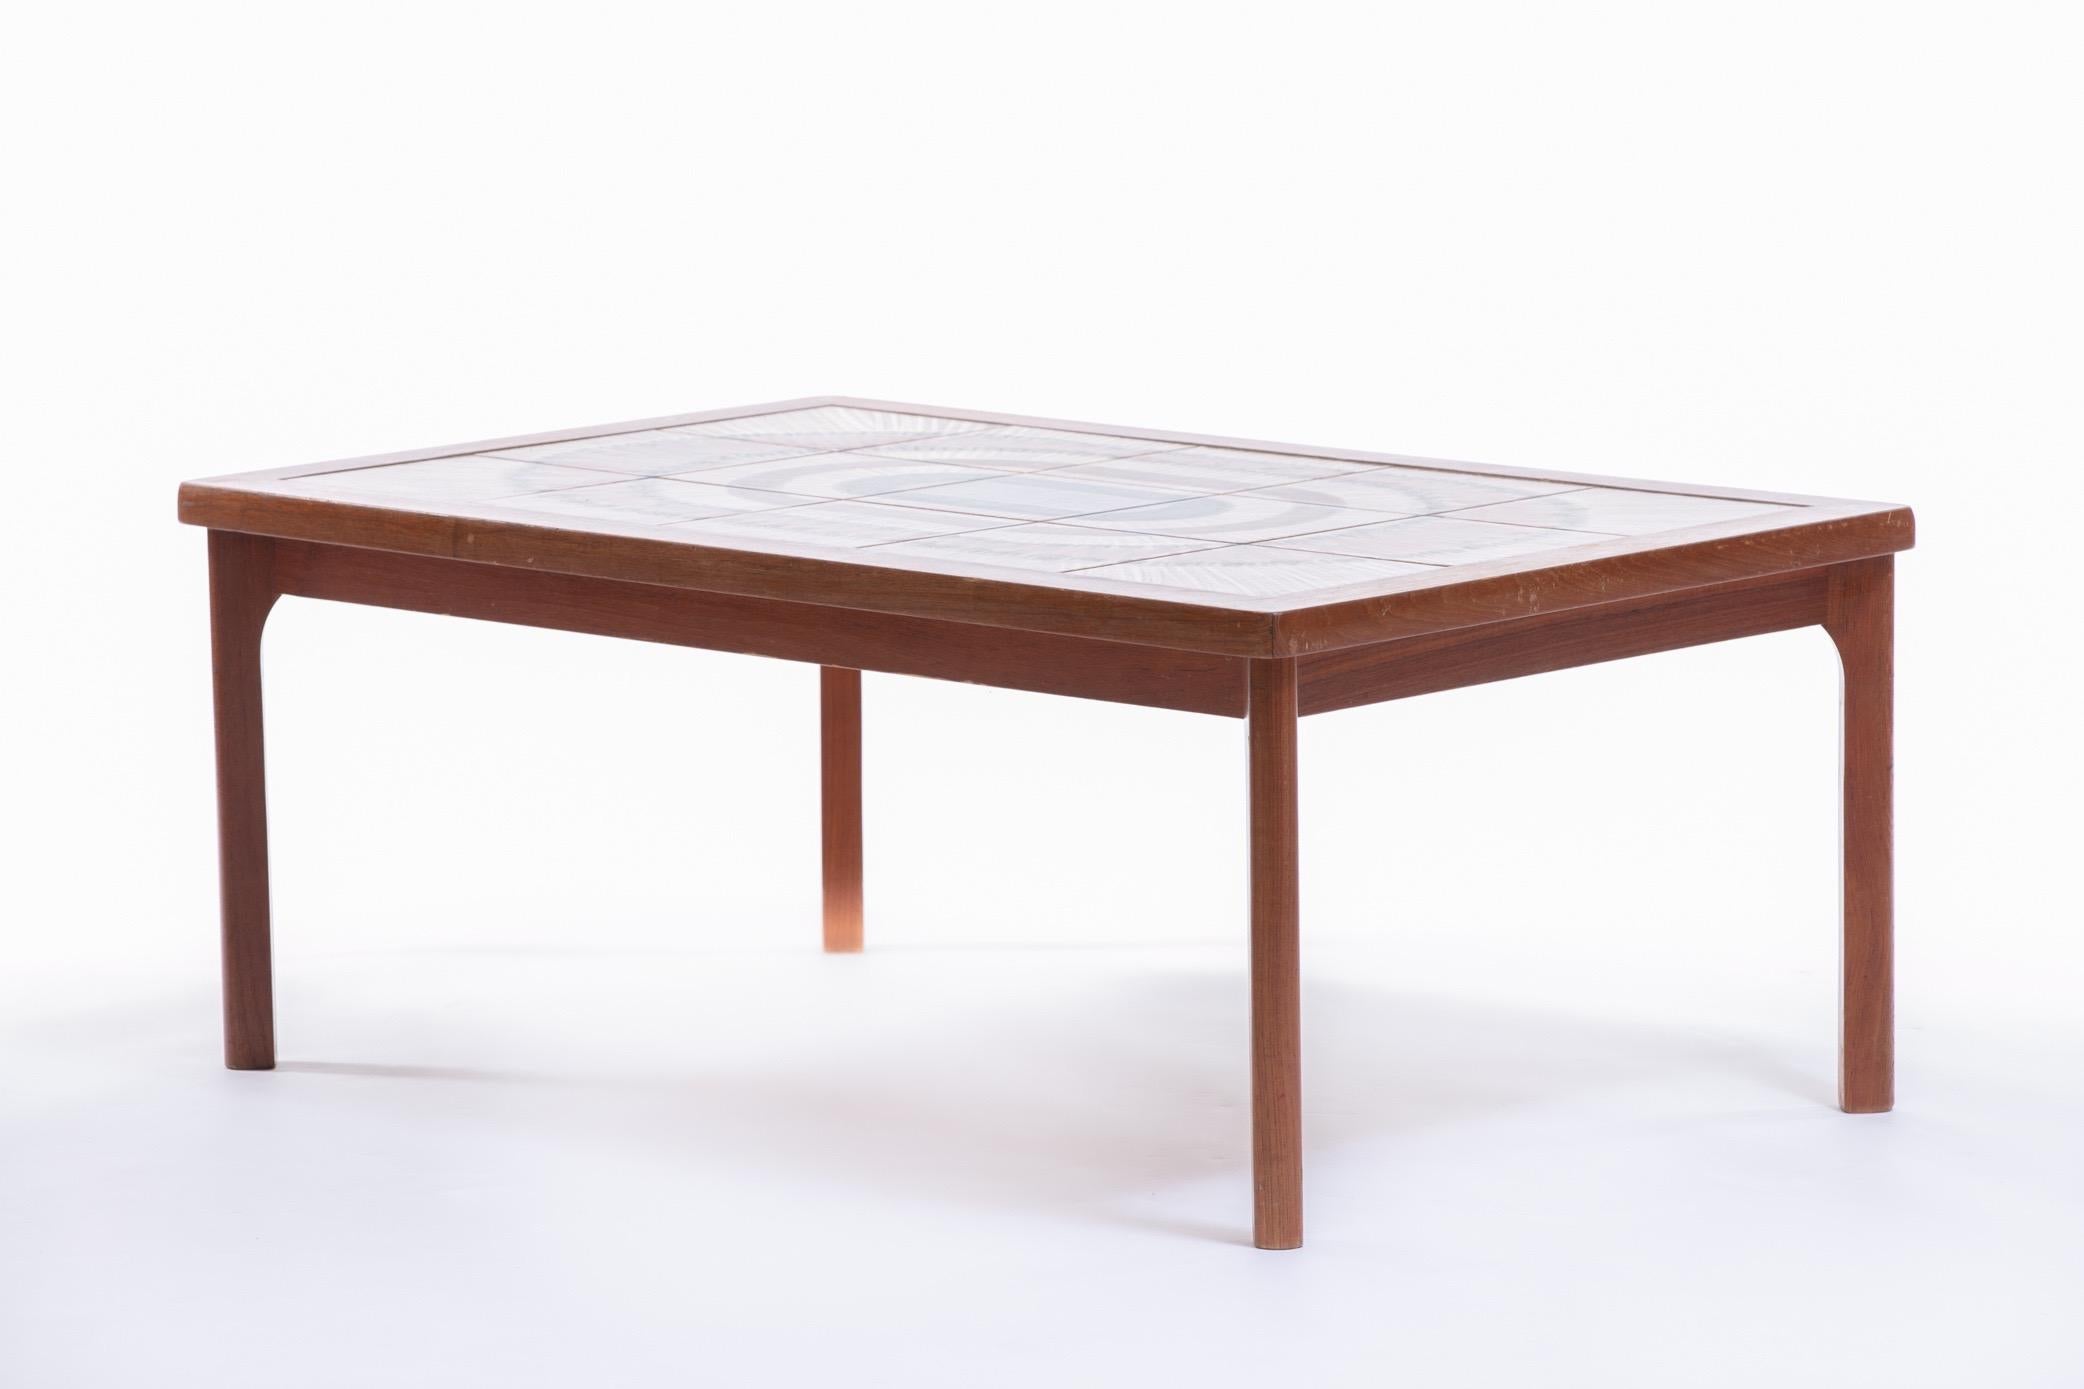 Unique vintage Danish modern teak coffee table made by Toften Mobelfabrik. Beautiful earth toned painted artistic tile - signed. Structurally sound with very minimal wear. No damage to tiles. Table is stamped by Toften Mobelfabrik. Want to see more